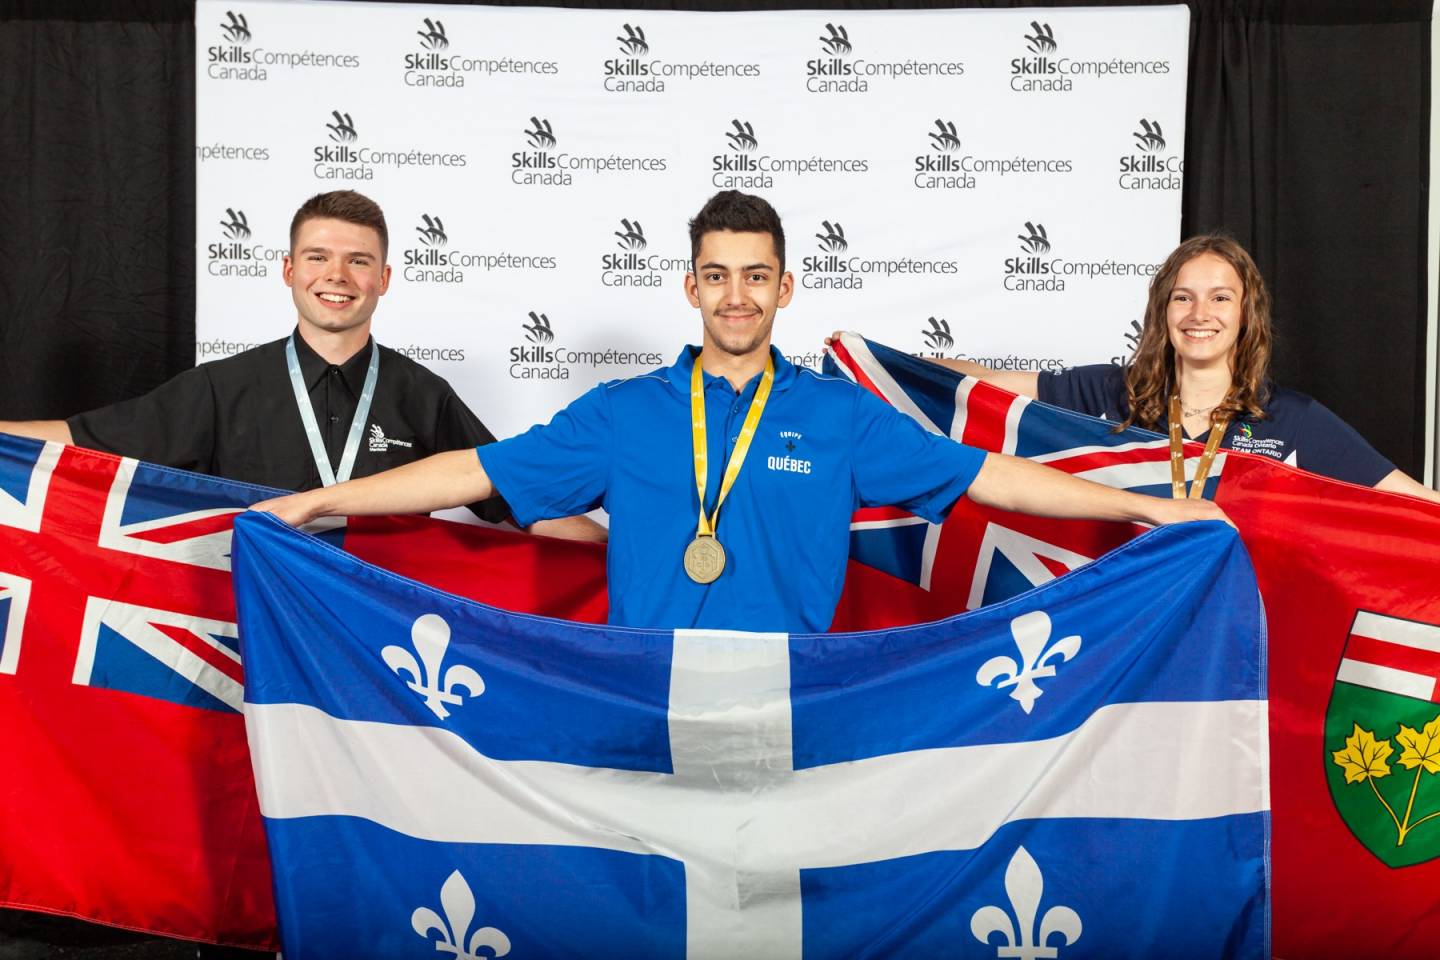 The Courrier du Sud |  Canadian Skills and Technology Olympiad: An ÉNA student wins gold